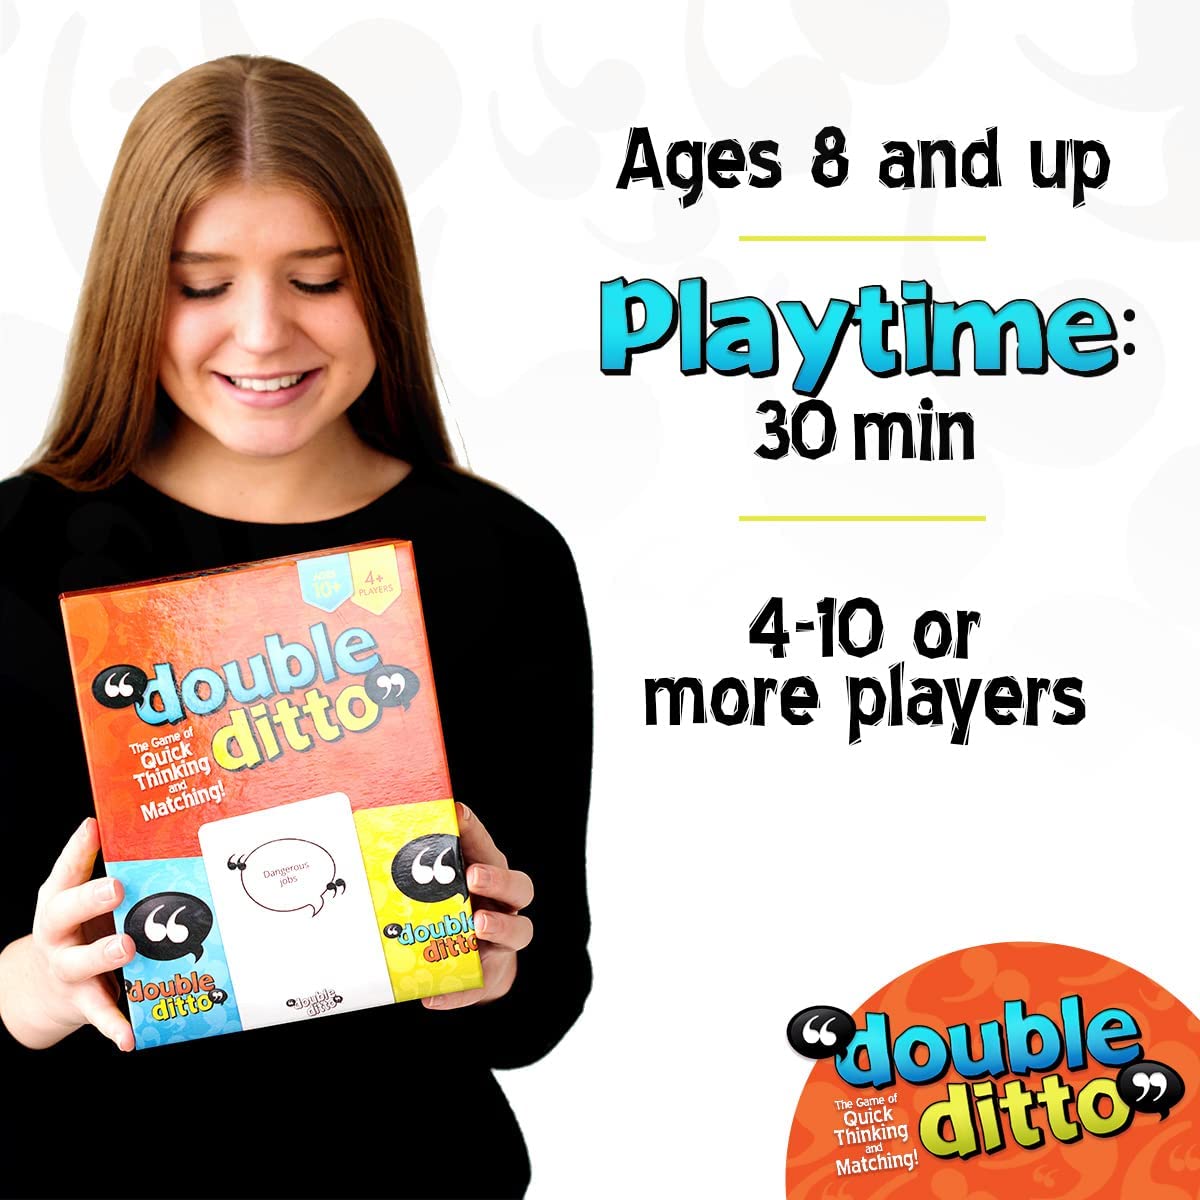 Double Ditto - A Hilarious Family Party Word Board Game - Family Games -Games for Kids Ages 8-12, Teens, & Adults - Family Games for Game Night - Family Games for Kids and Adults